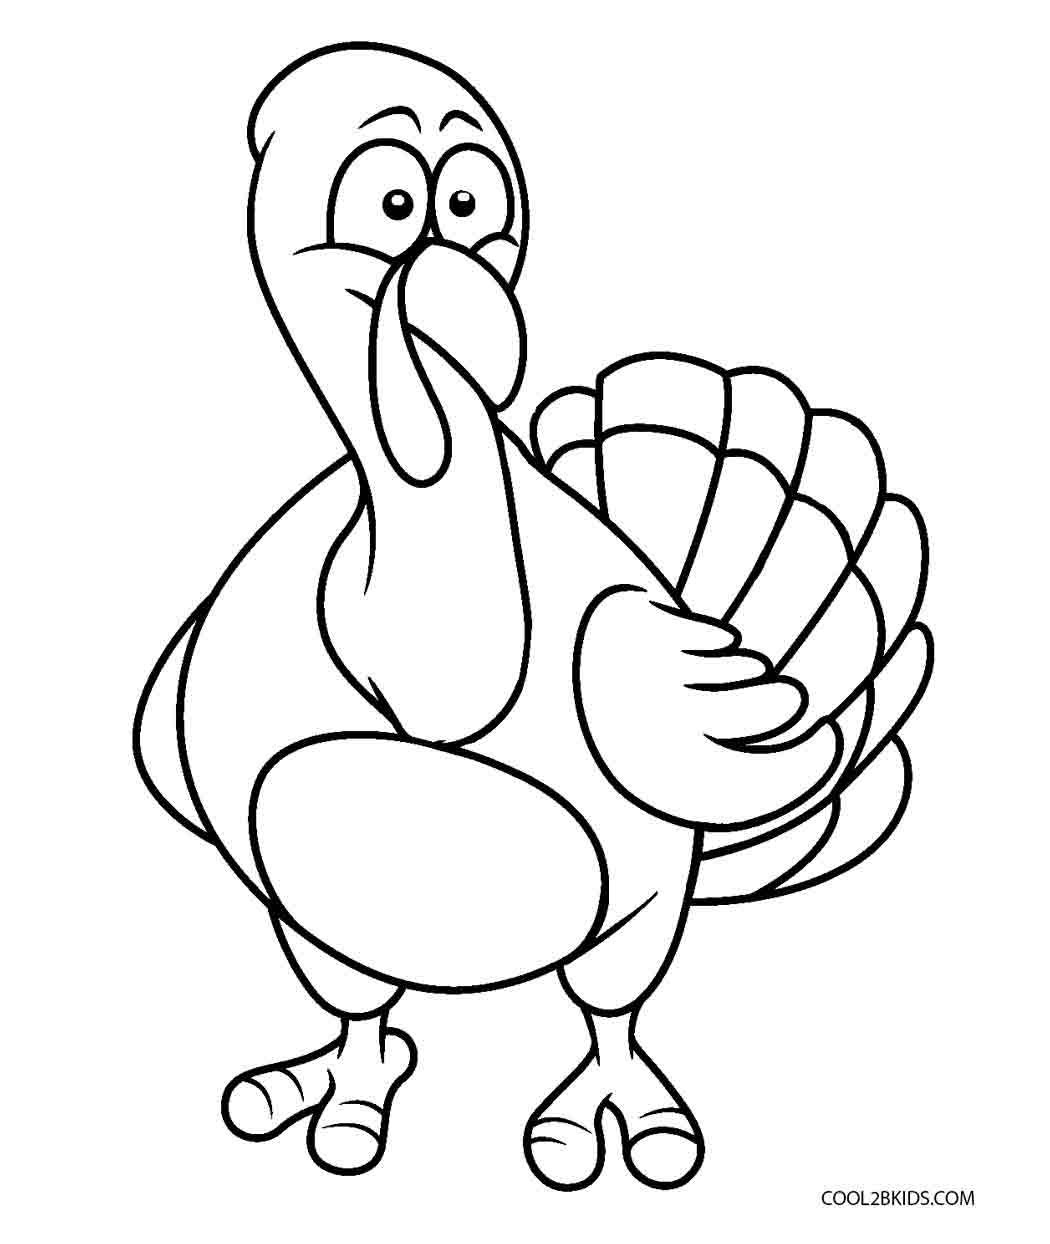 Thanksgiving Coloring Pages For Preschoolers
 Free Printable Turkey Coloring Pages For Kids